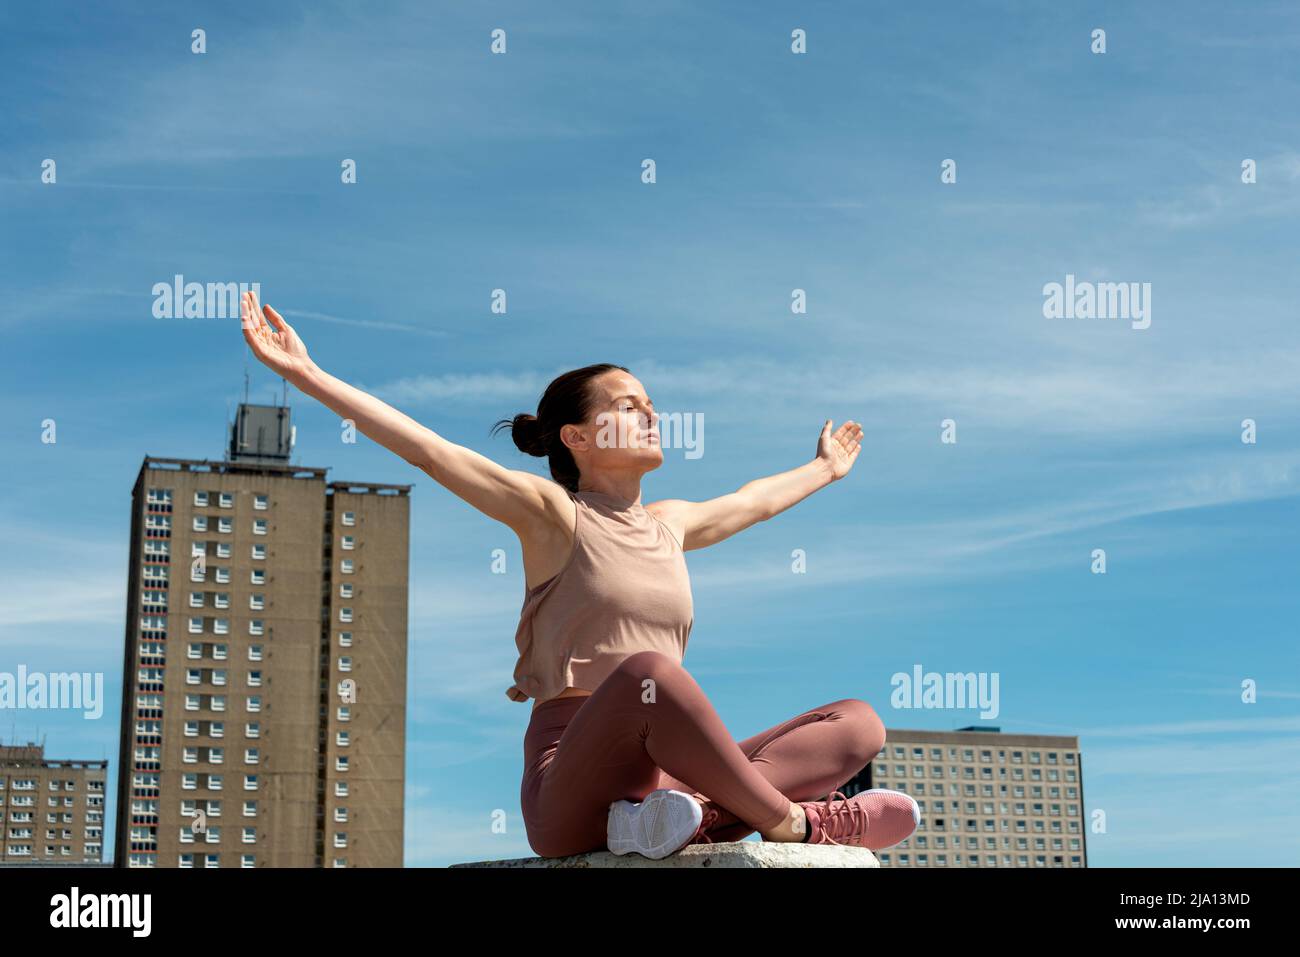 Sporty fit woman sitting crossed legged with arms outstretched enjoying the sun, Stock Photo